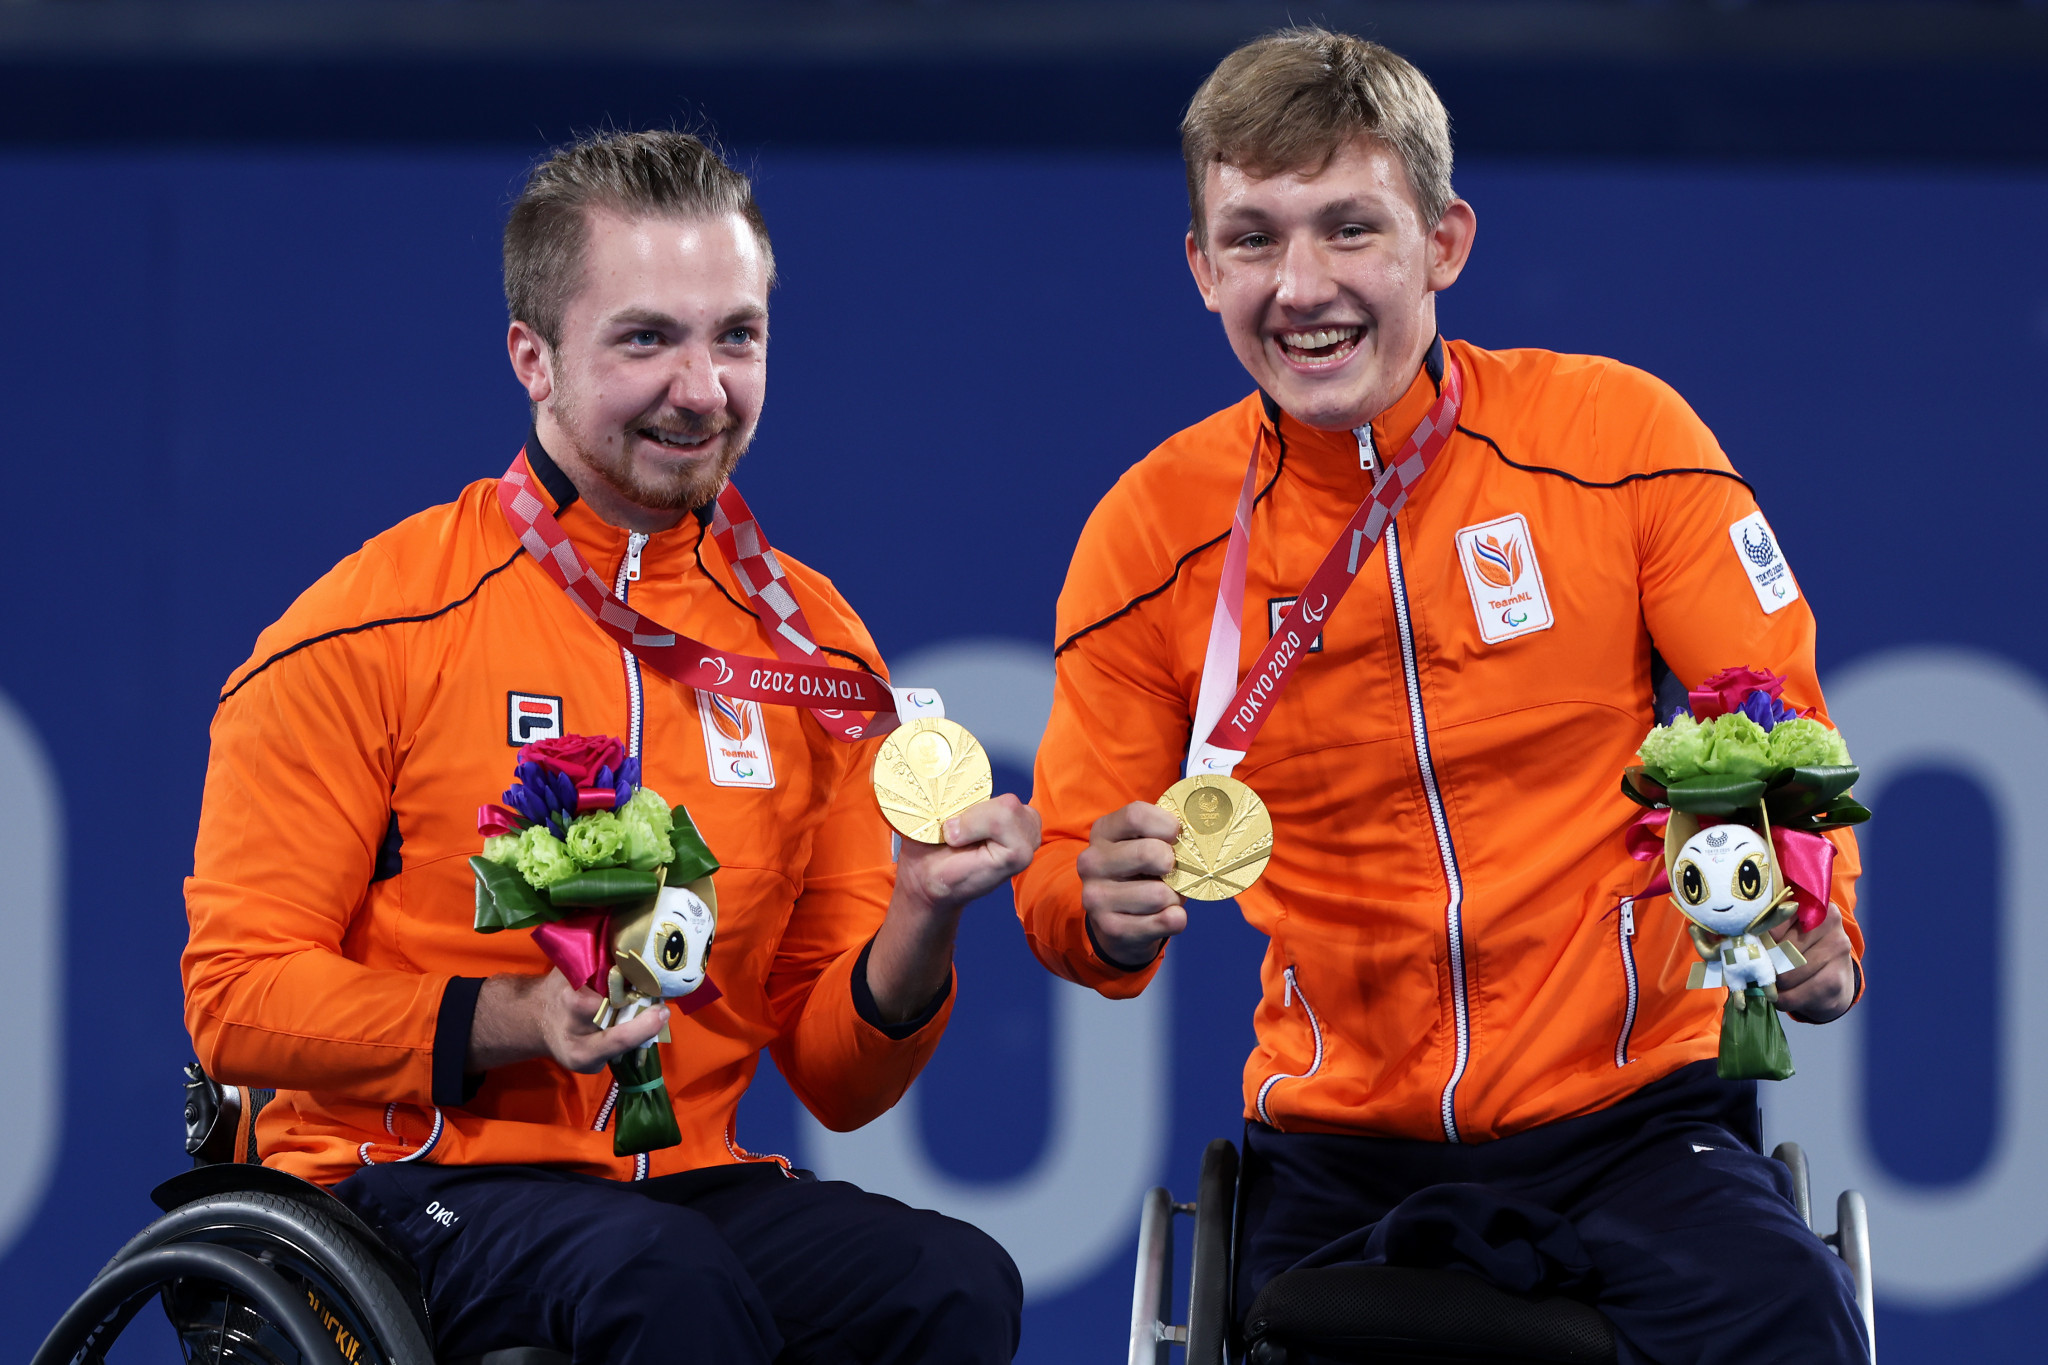 Sam Schroder, left, and Neil Vink followed up their Tokyo 2020 quads doubles gold medal with victory at the NEC Wheelchair Tennis Masters ©Getty Images